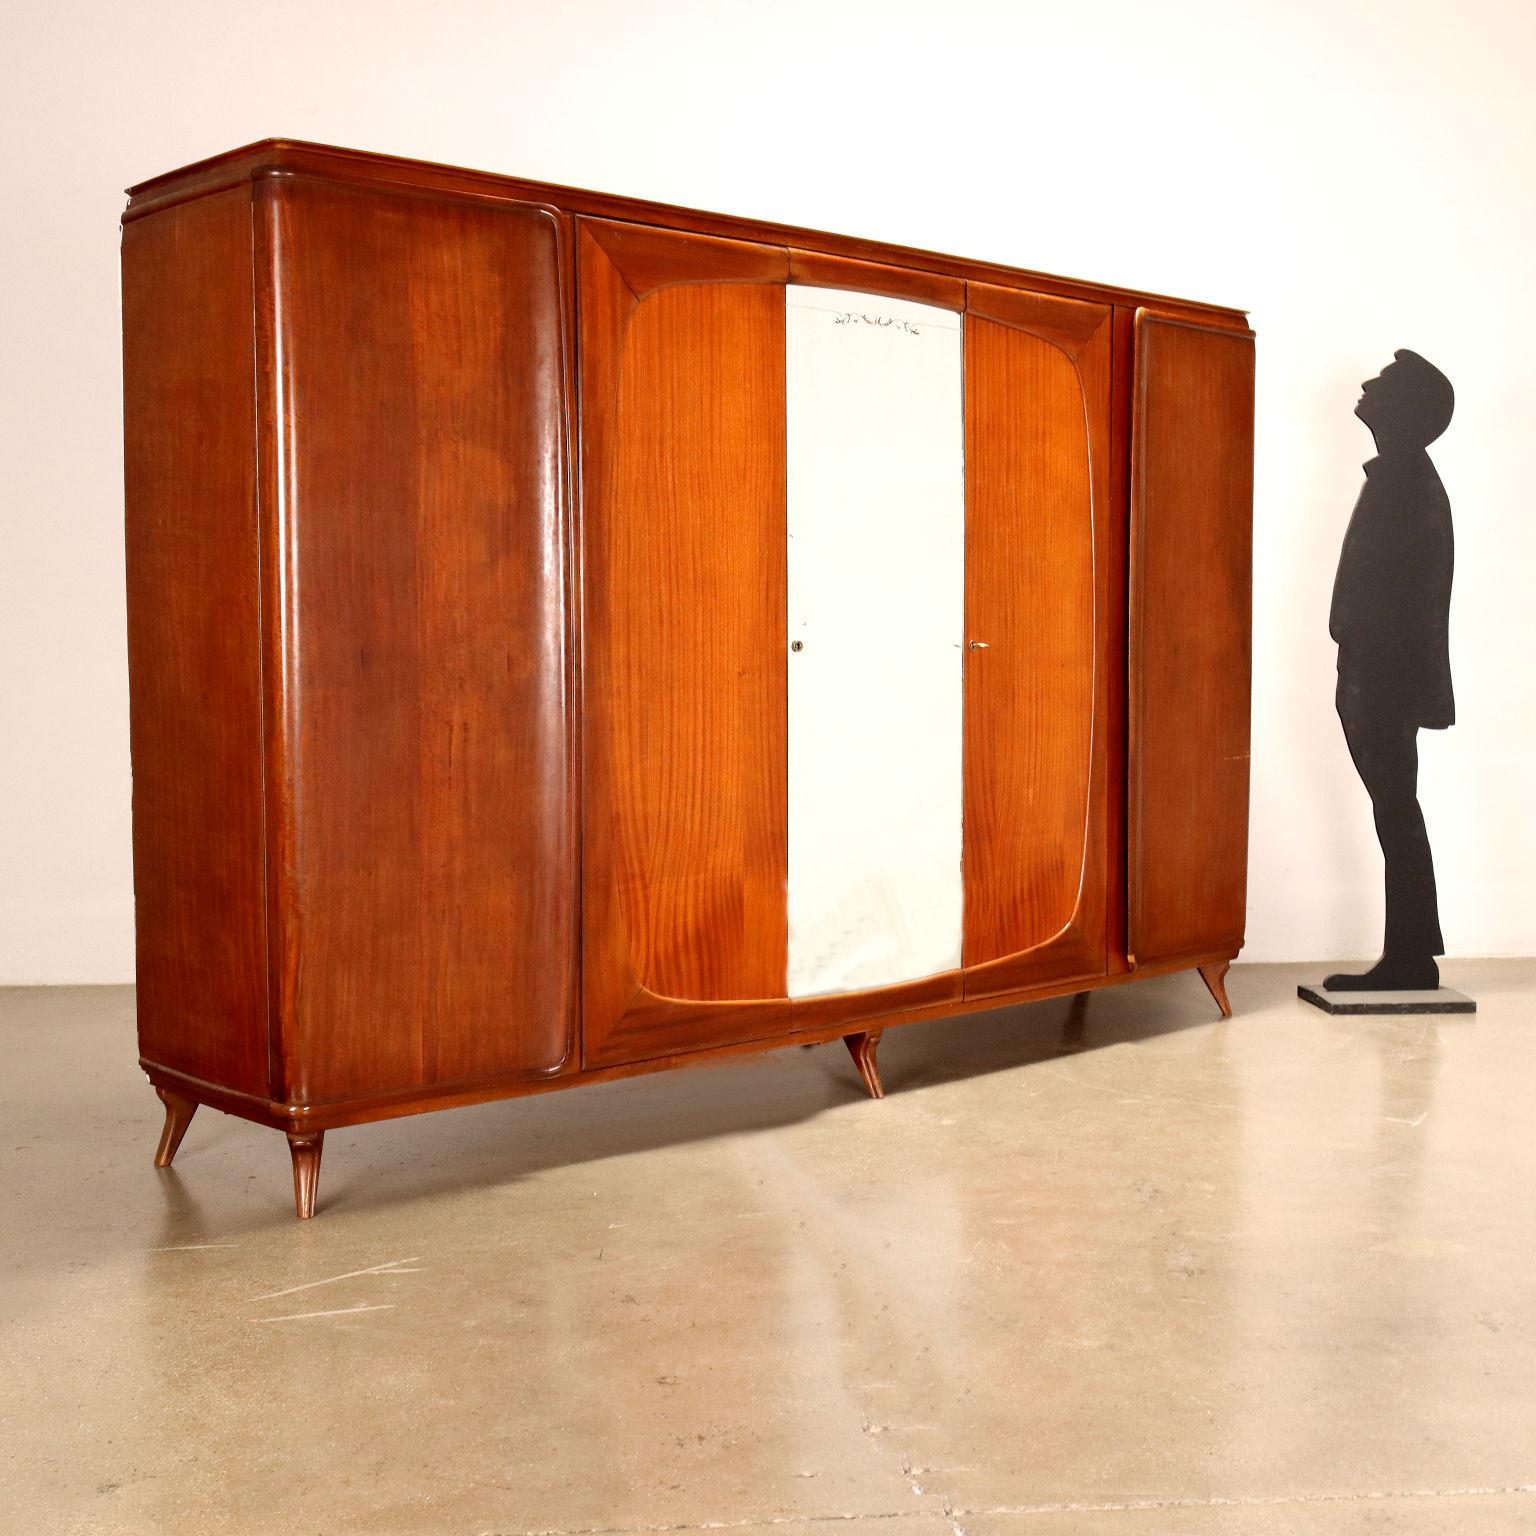 Cabinet with 5 hinged doors, made of mahogany veneer wood and mirrored glass. 